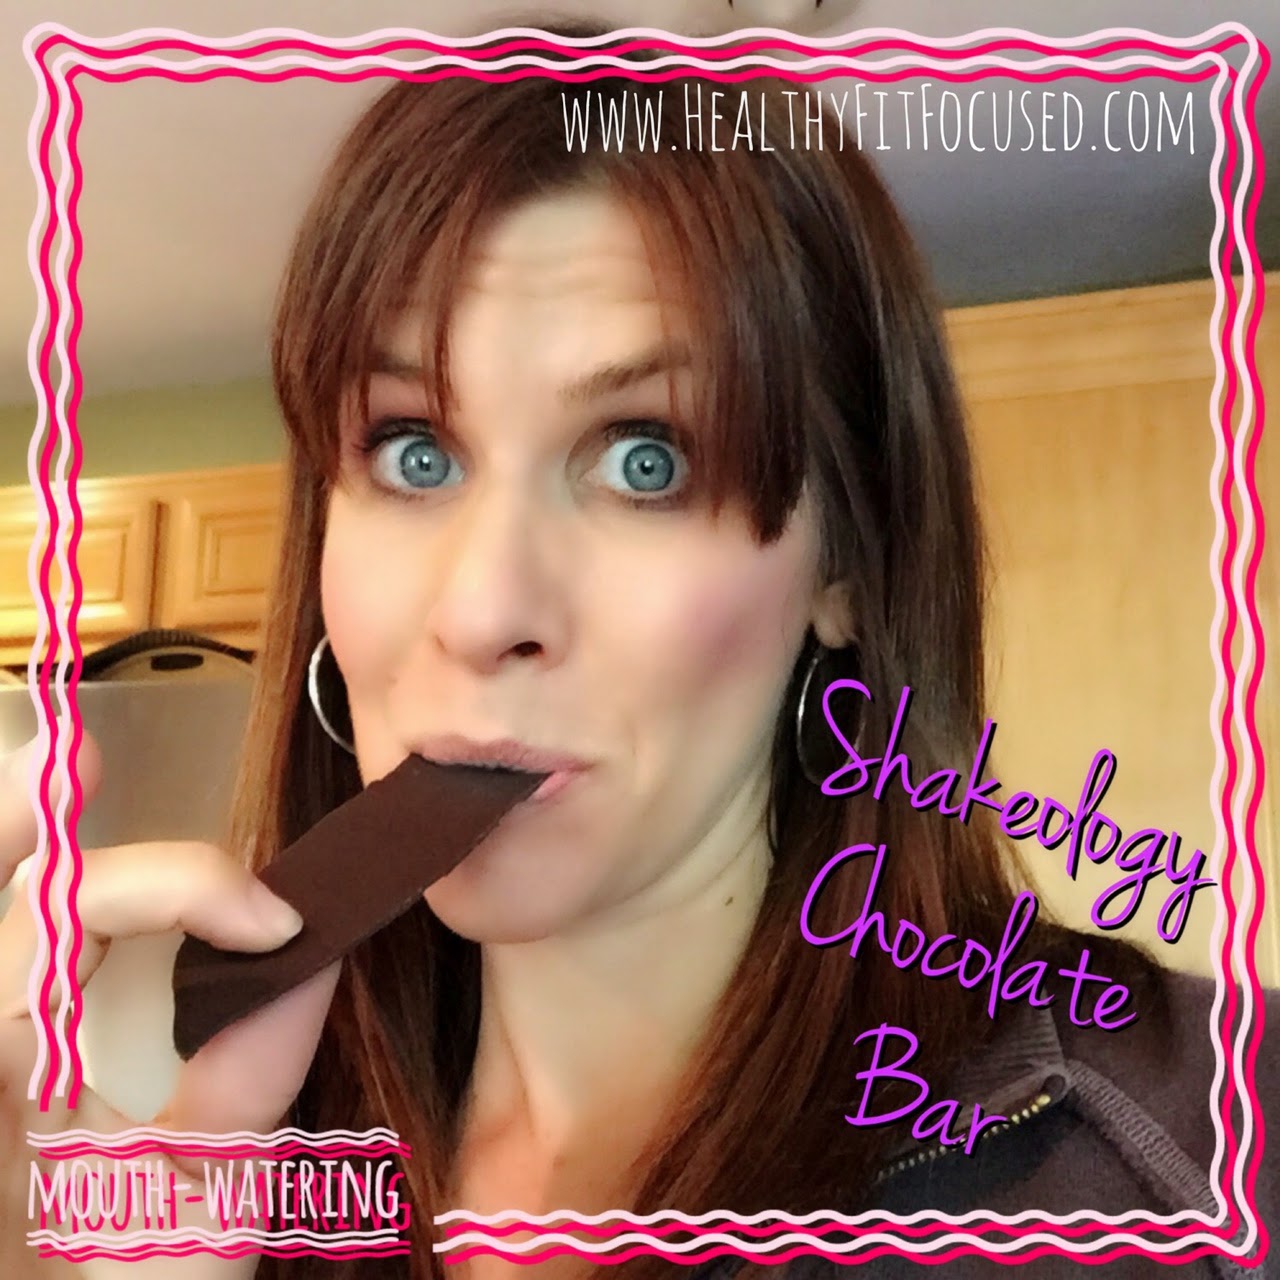 21 Day Fix Approved Chocolate Bar, Clean Eating Chocolate, Shakeology Chocolate Bar, www.HealthyFitFocused.com 